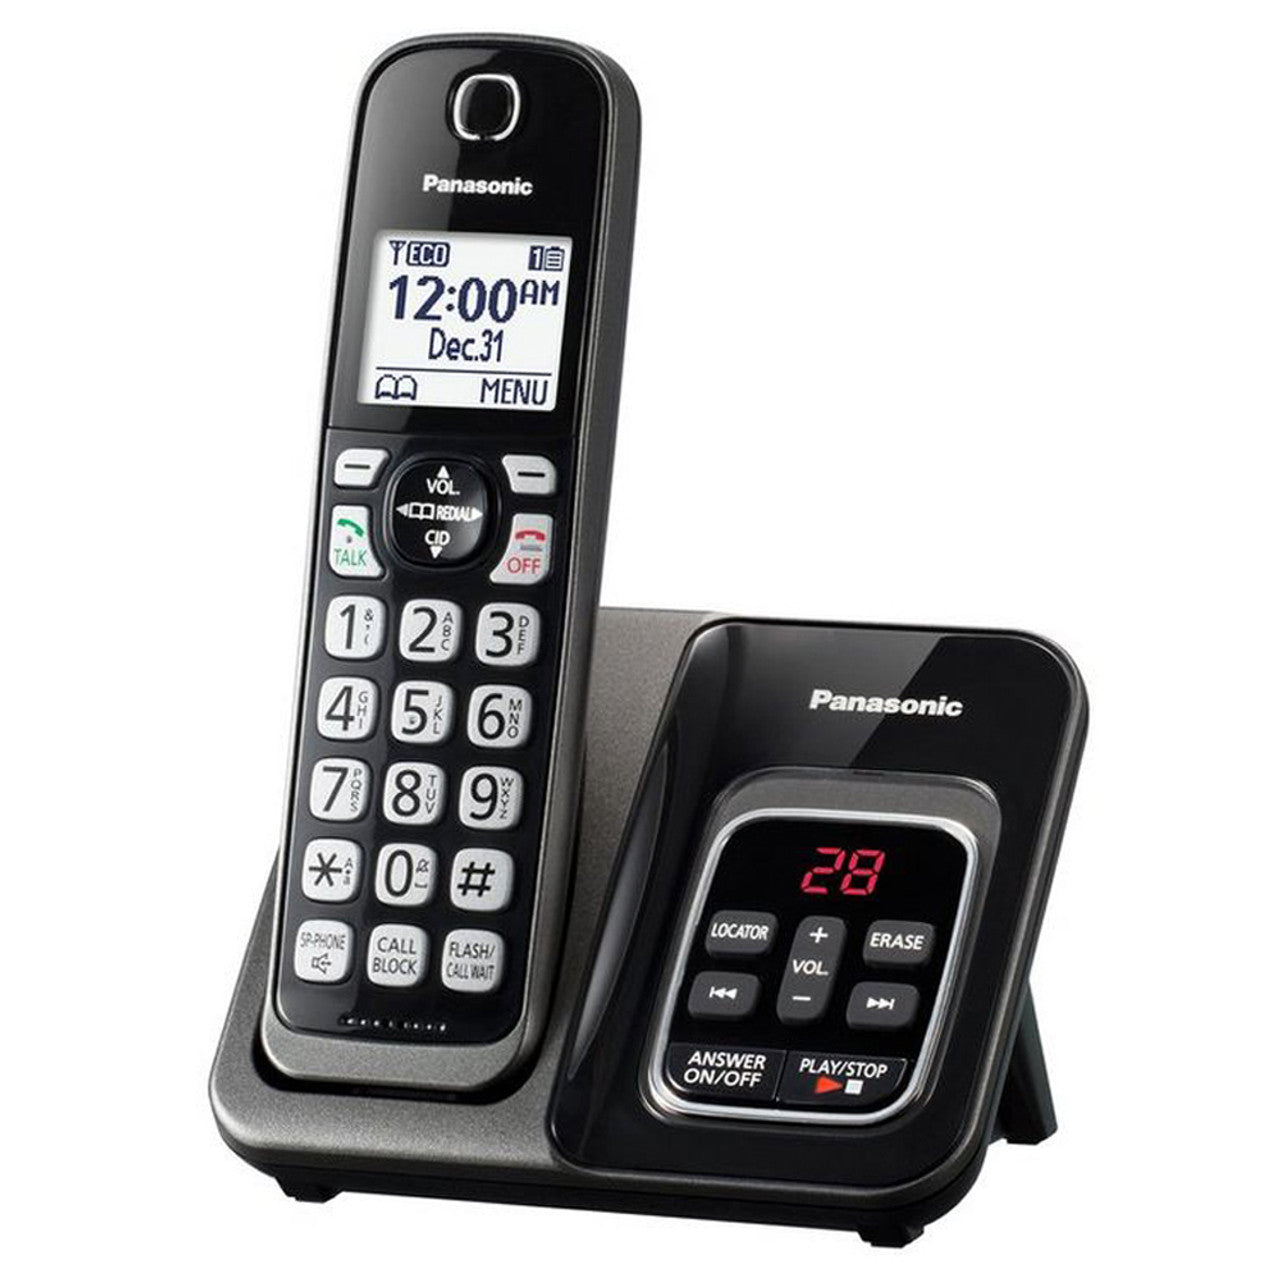 Panasonic Cordless Phone With Talking Caller ID sitting in it's cradle.